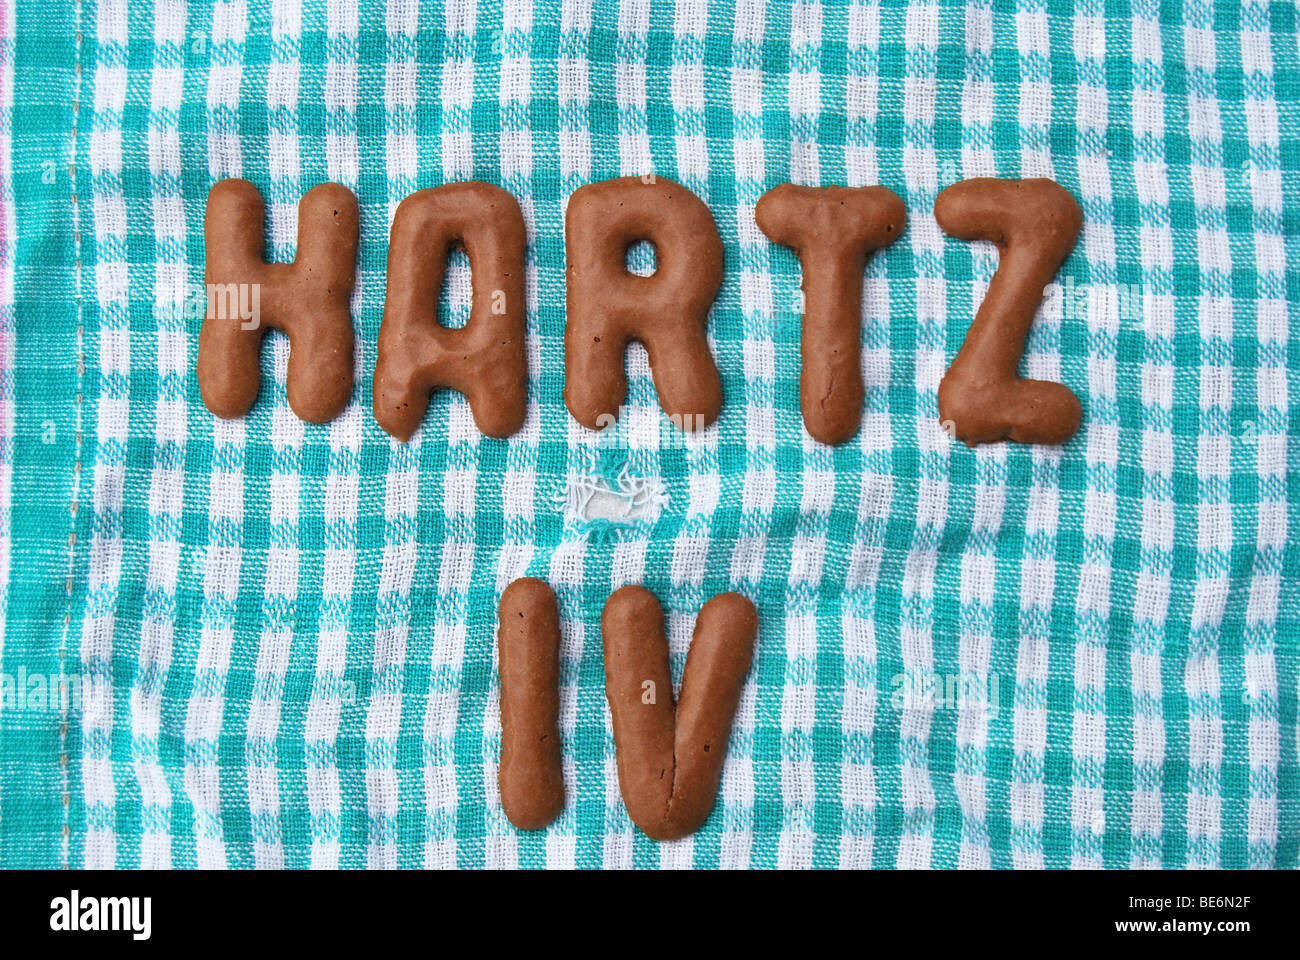 Hartz IV, written with Russian bread letter biscuits on an old teatowel Stock Photo